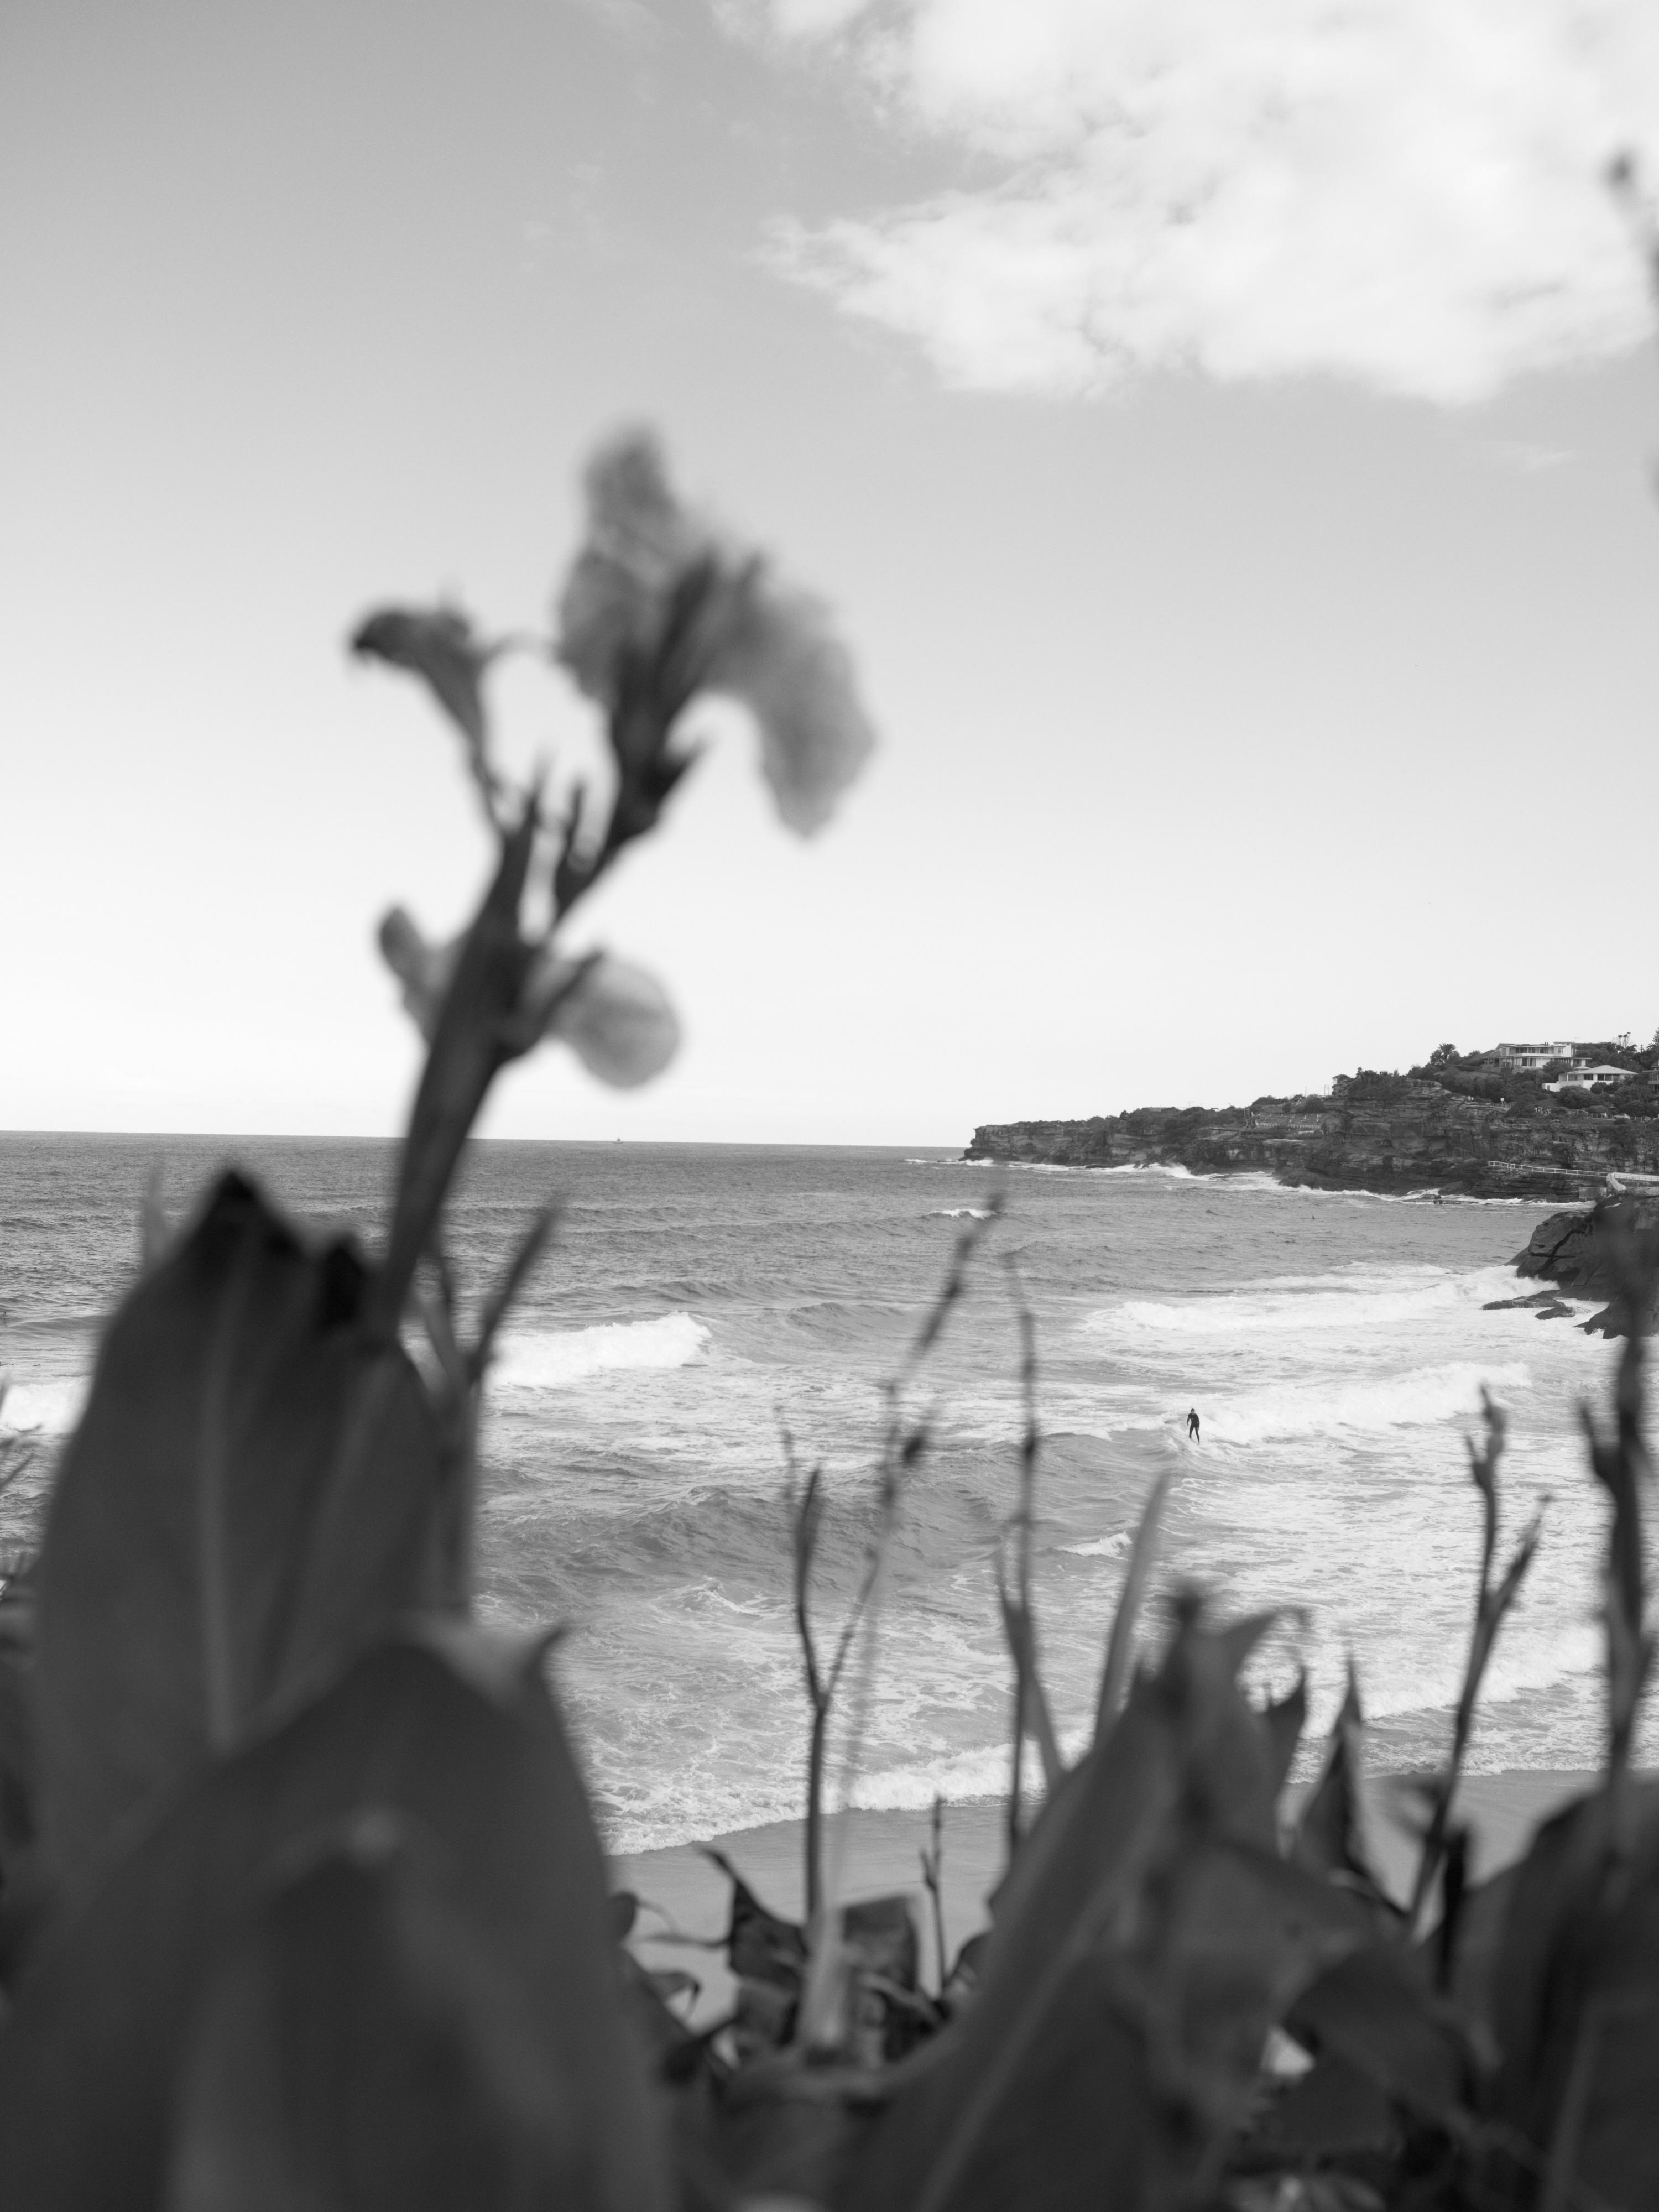 Flower and surfer